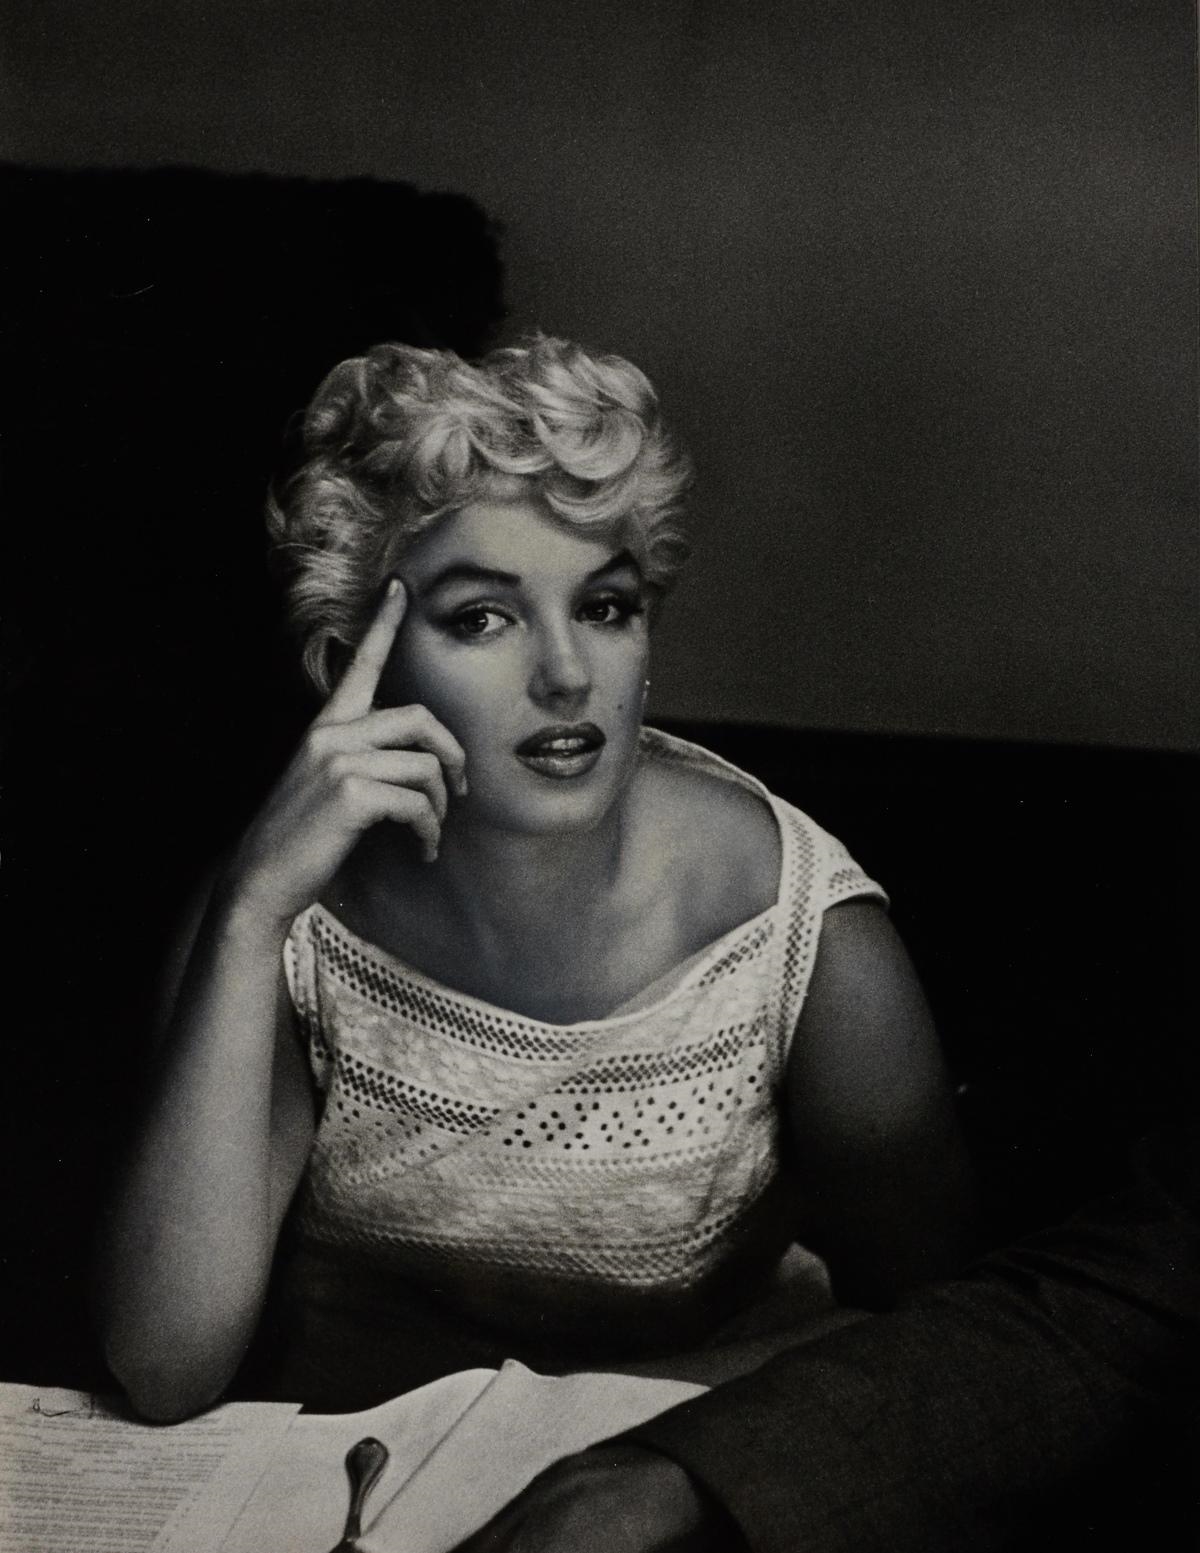 Artwork by Eve Arnold, Marilyn Monroe, Made of Vintage silver print